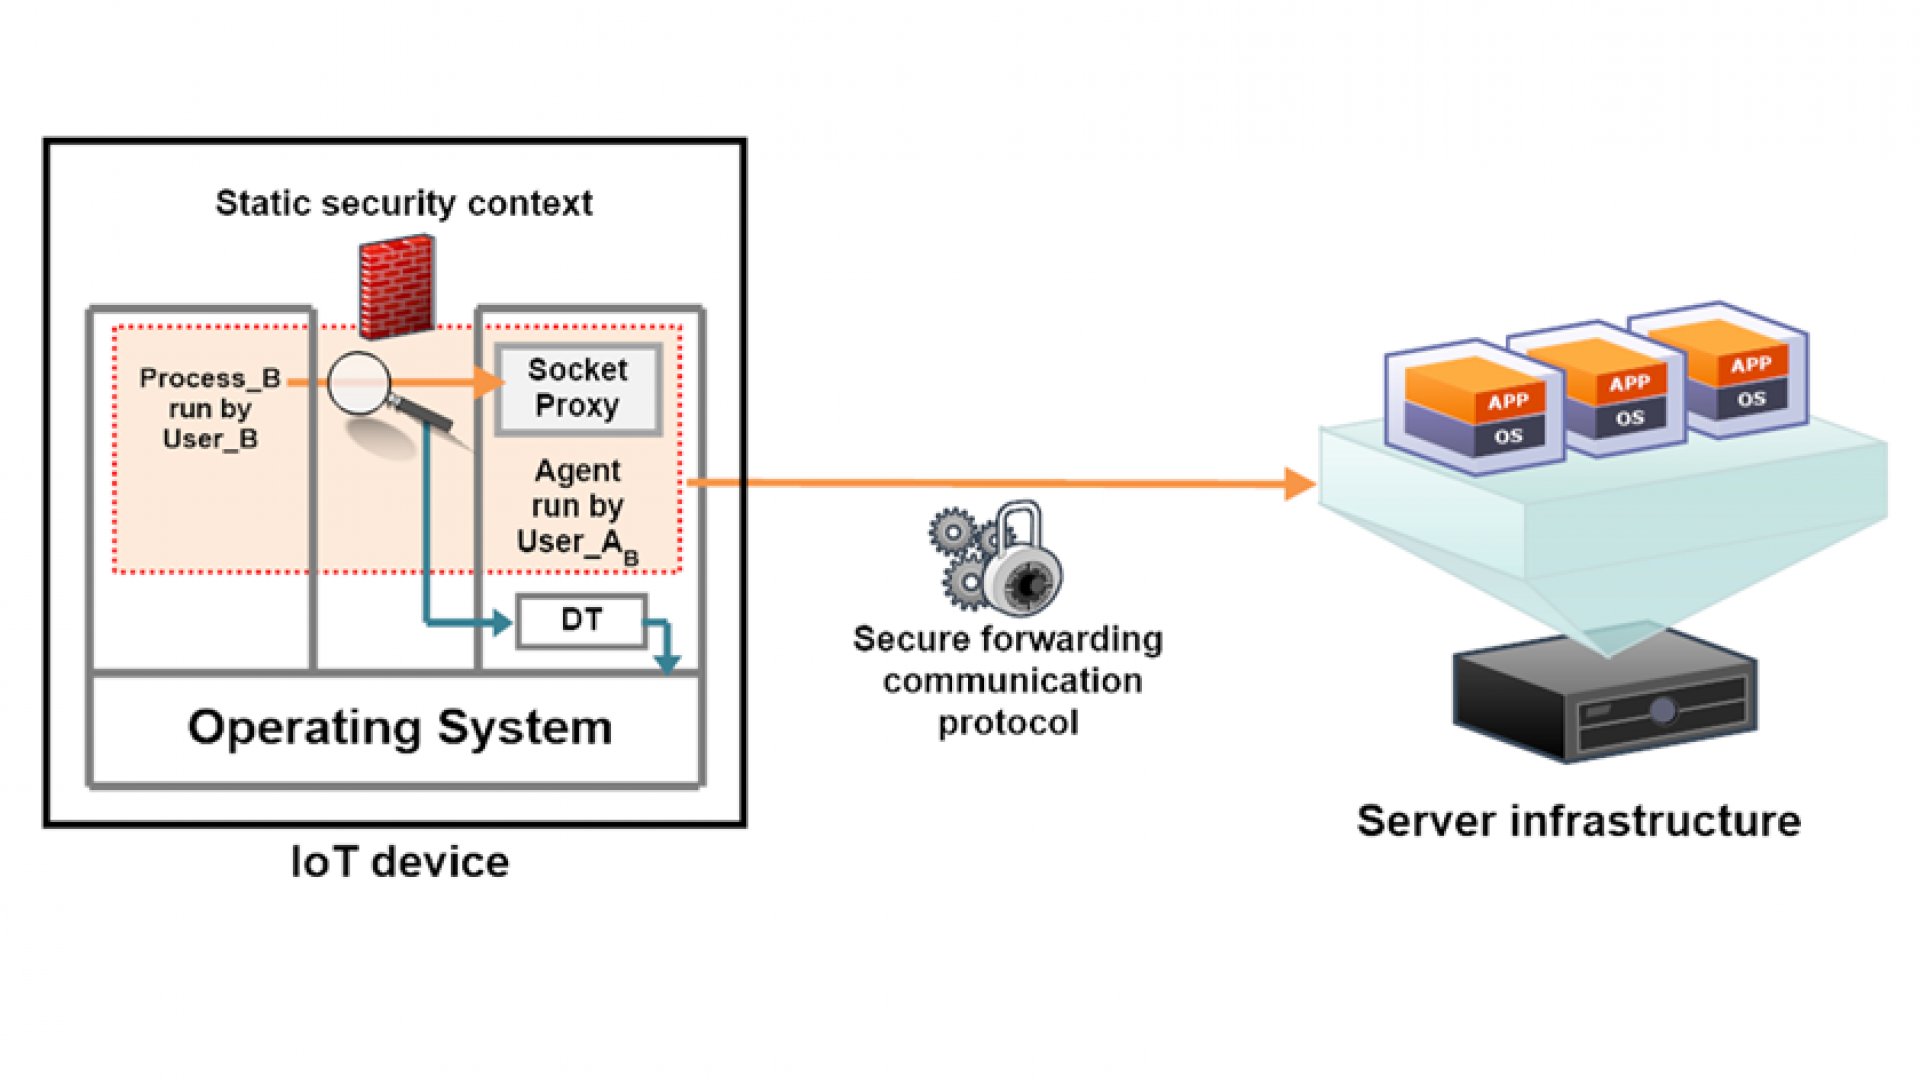 A digital twin for runtime monitoring communications in IoT